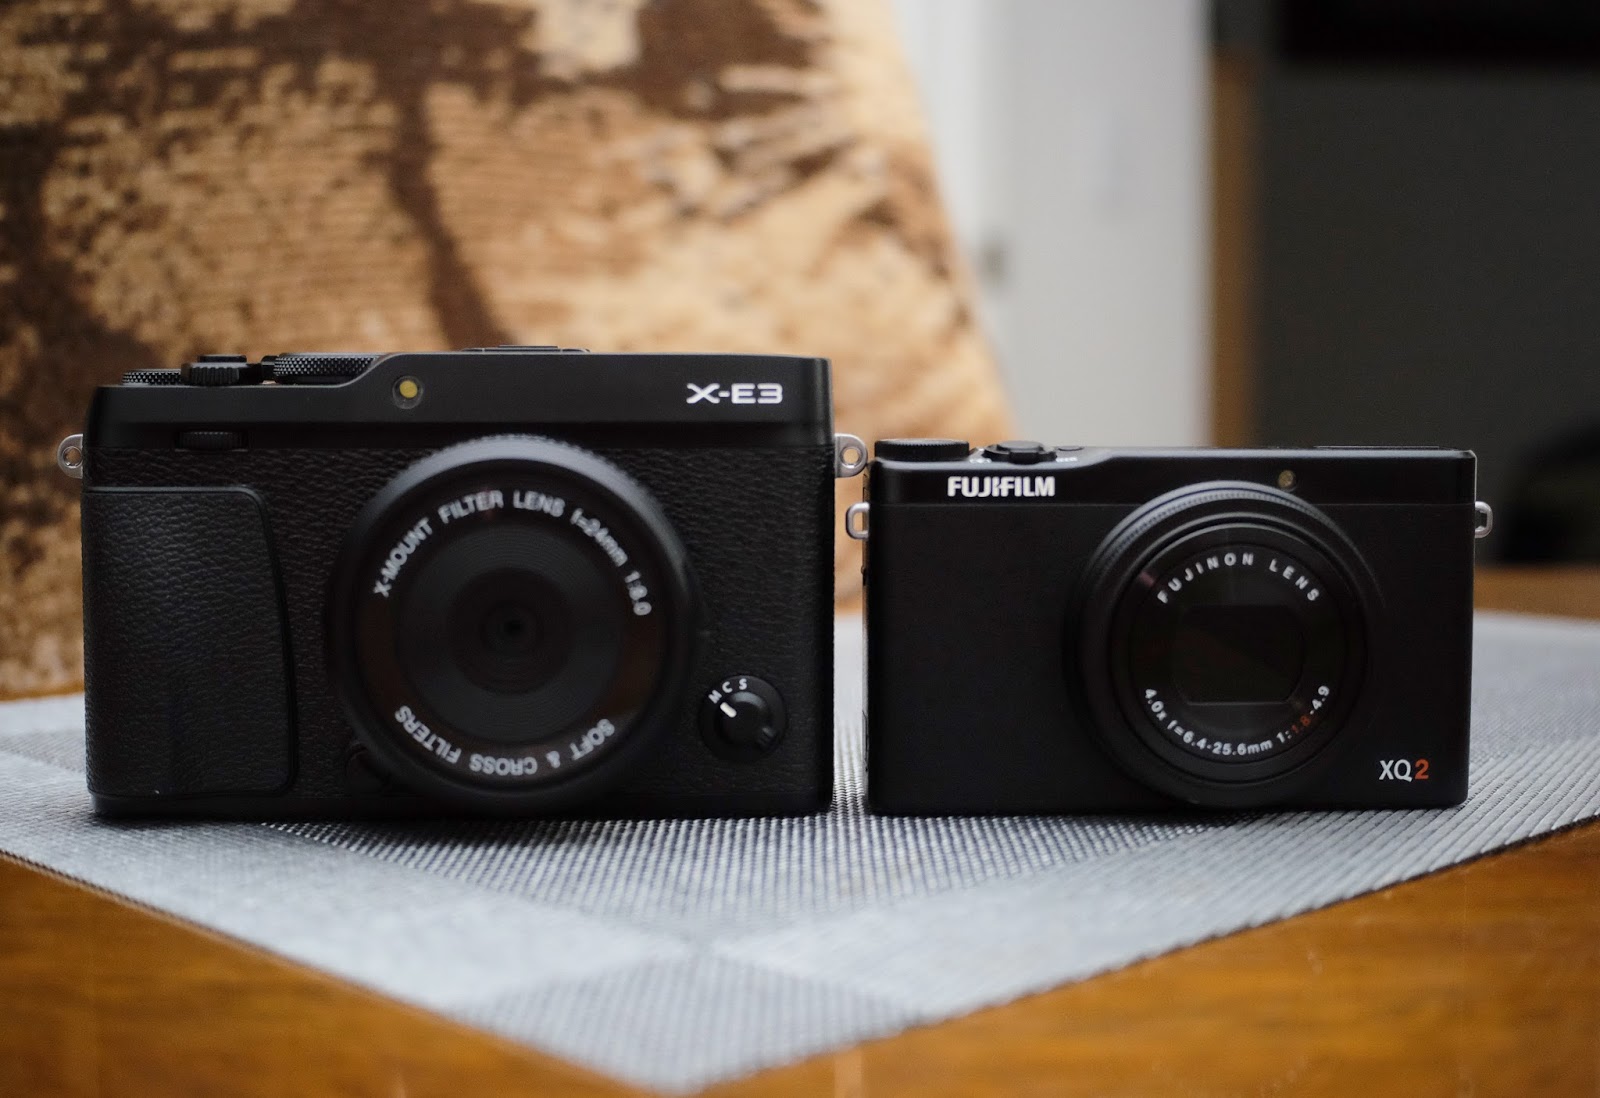 PHOTOGRAPHIC CENTRAL: Fujifilm XQ2 Review- More Than A Surprise